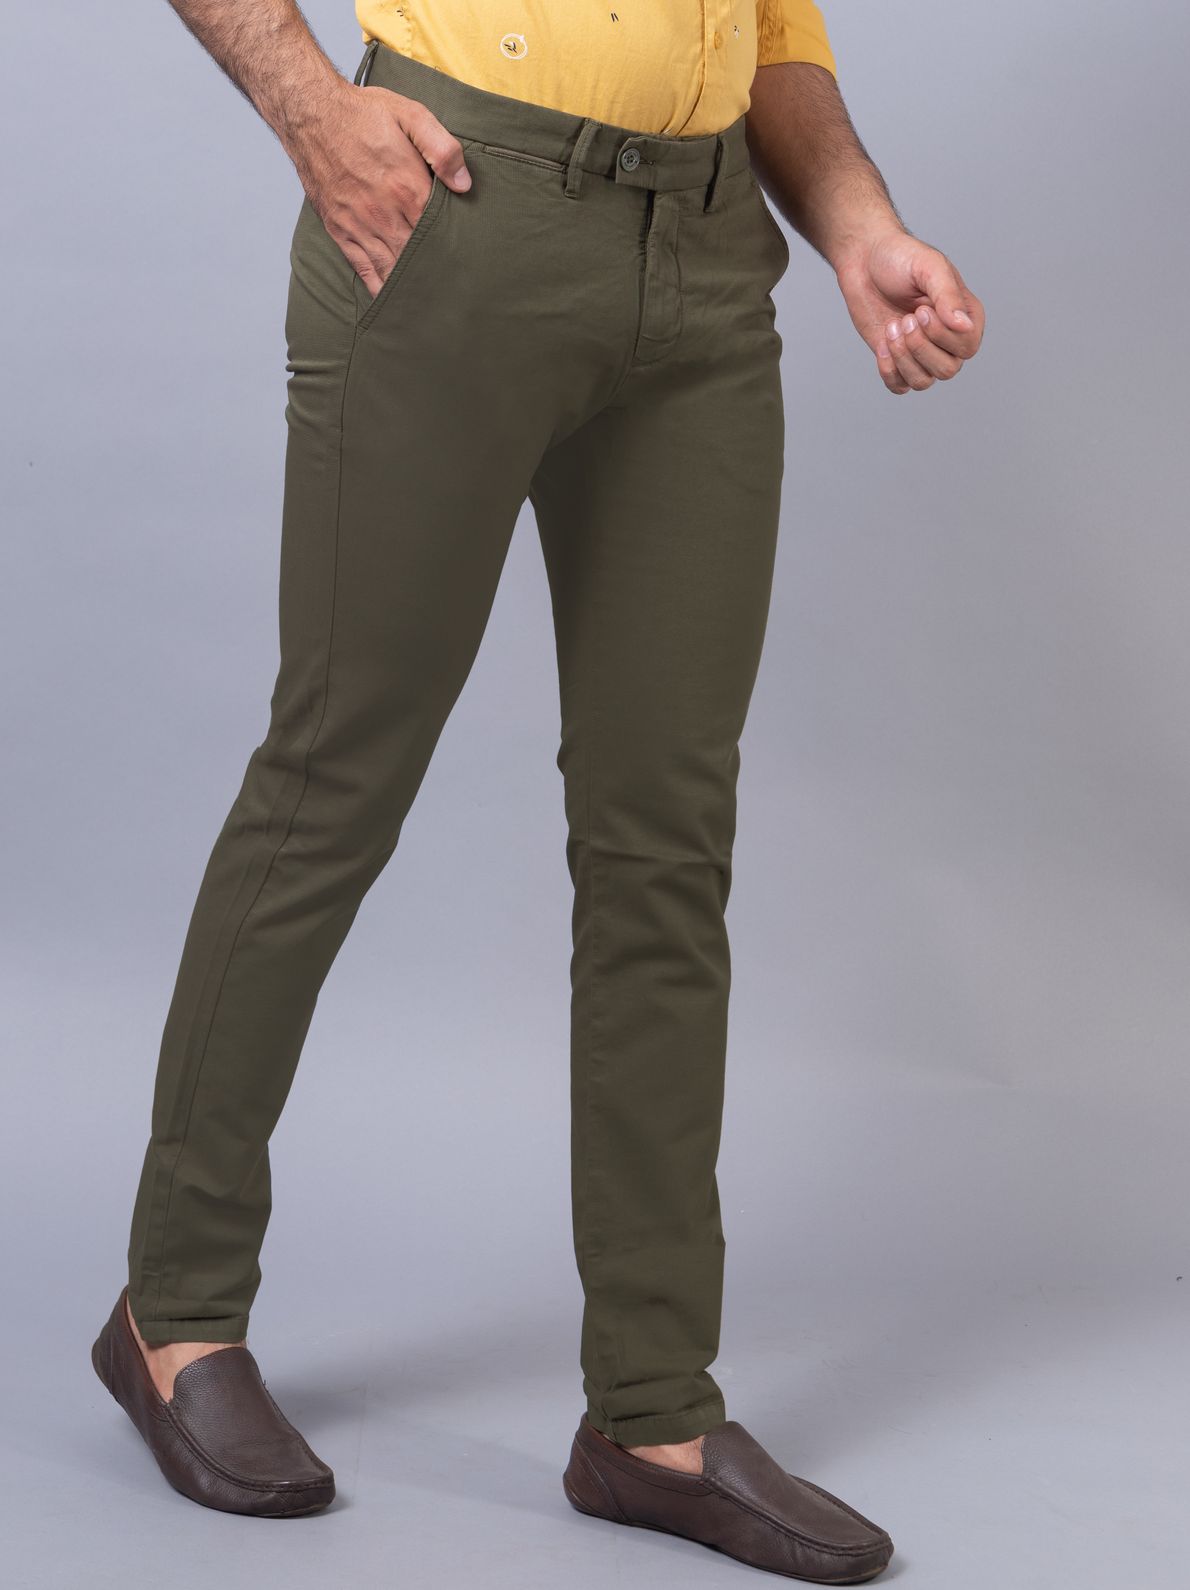 Turms Intelligent Apparel - Anti-Stain & Anti-odour - Sage - Mens Chinos -  Olive Green